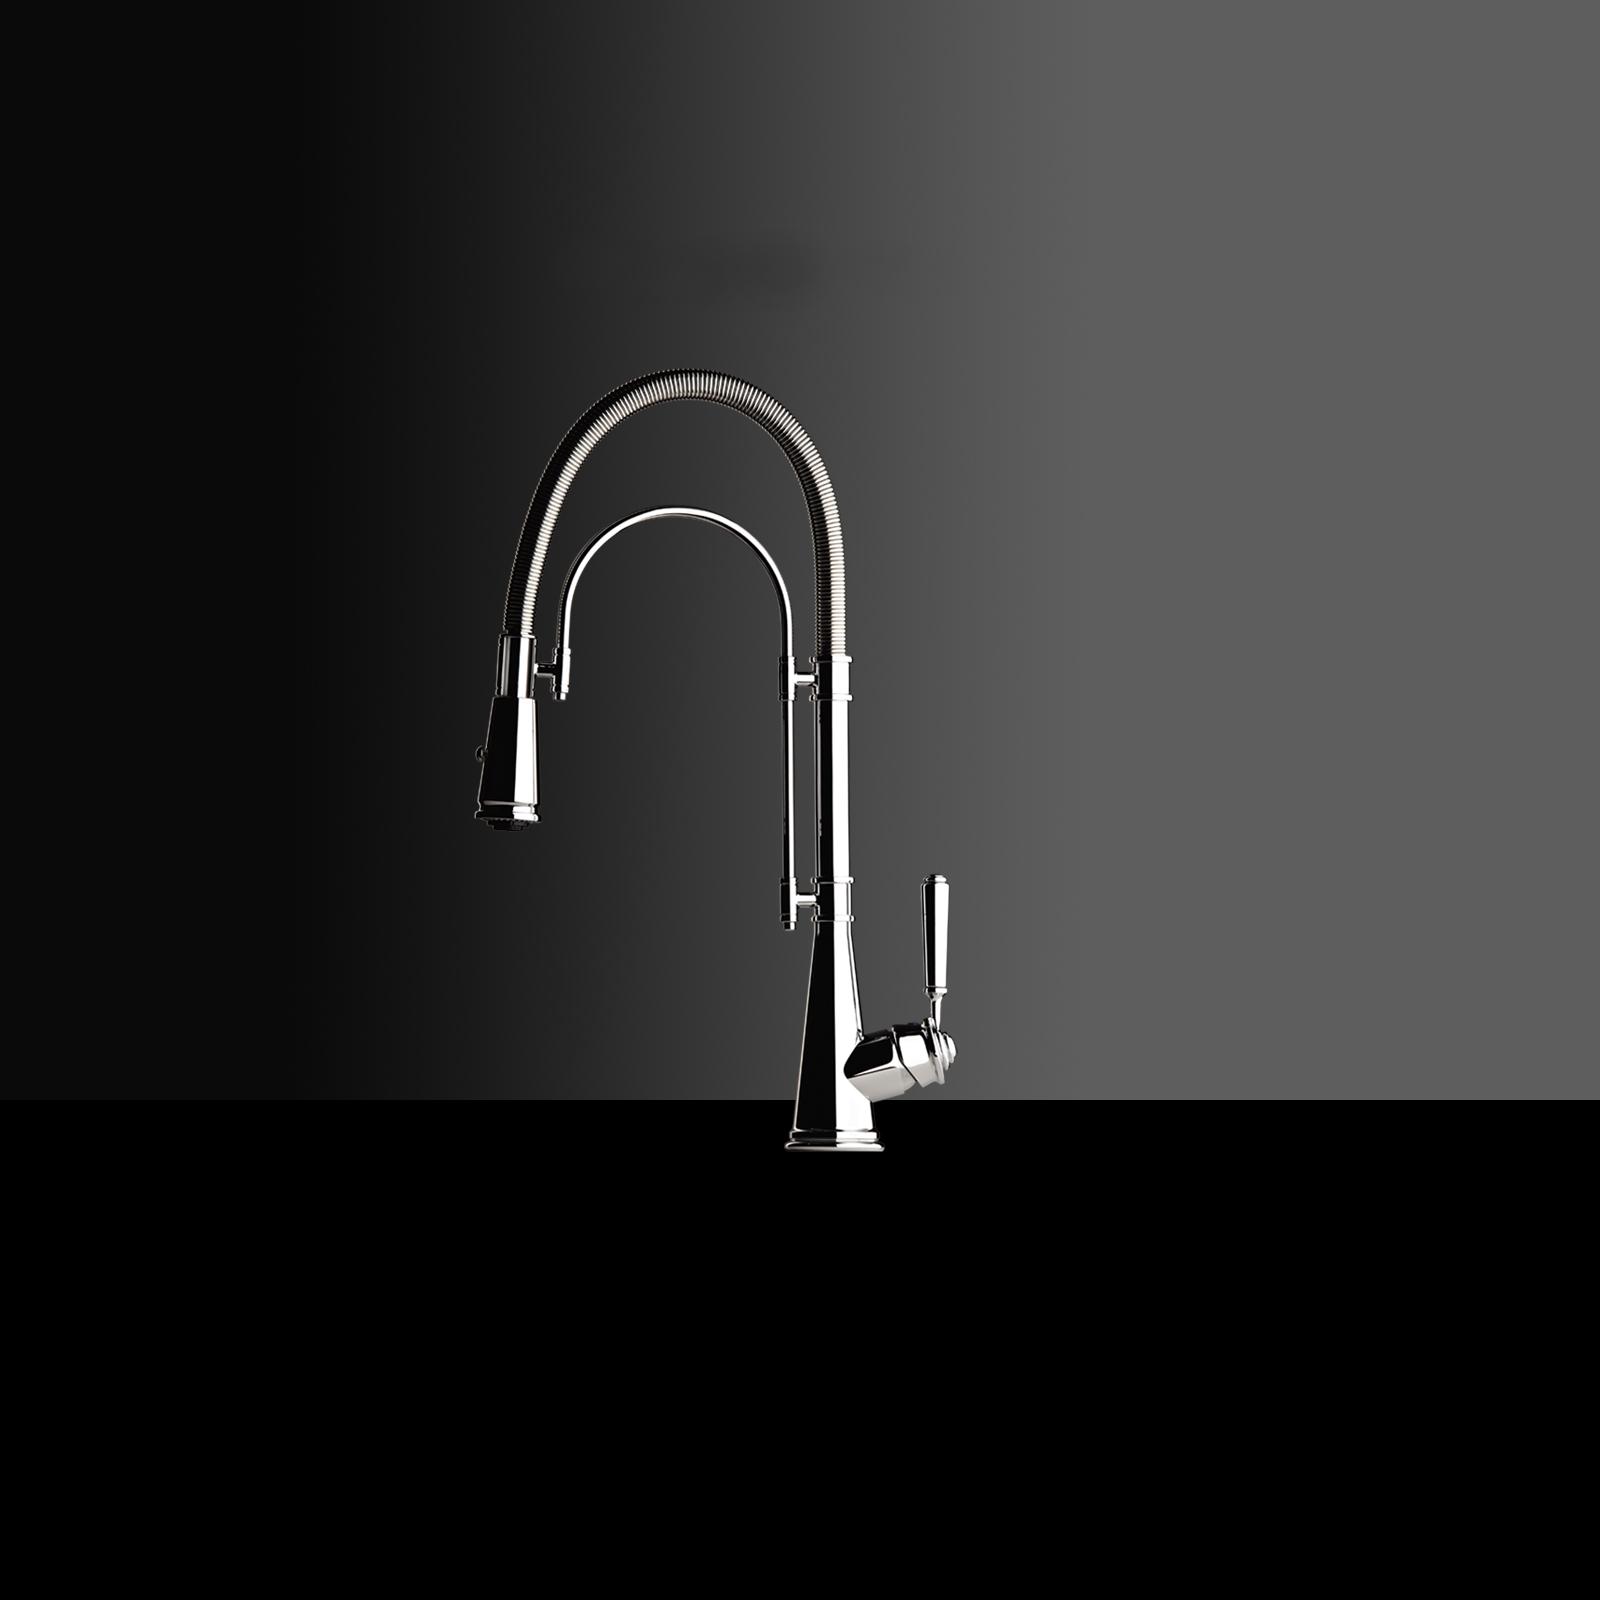 High-quality single lever tap Blaise - pull out spray - Chrome